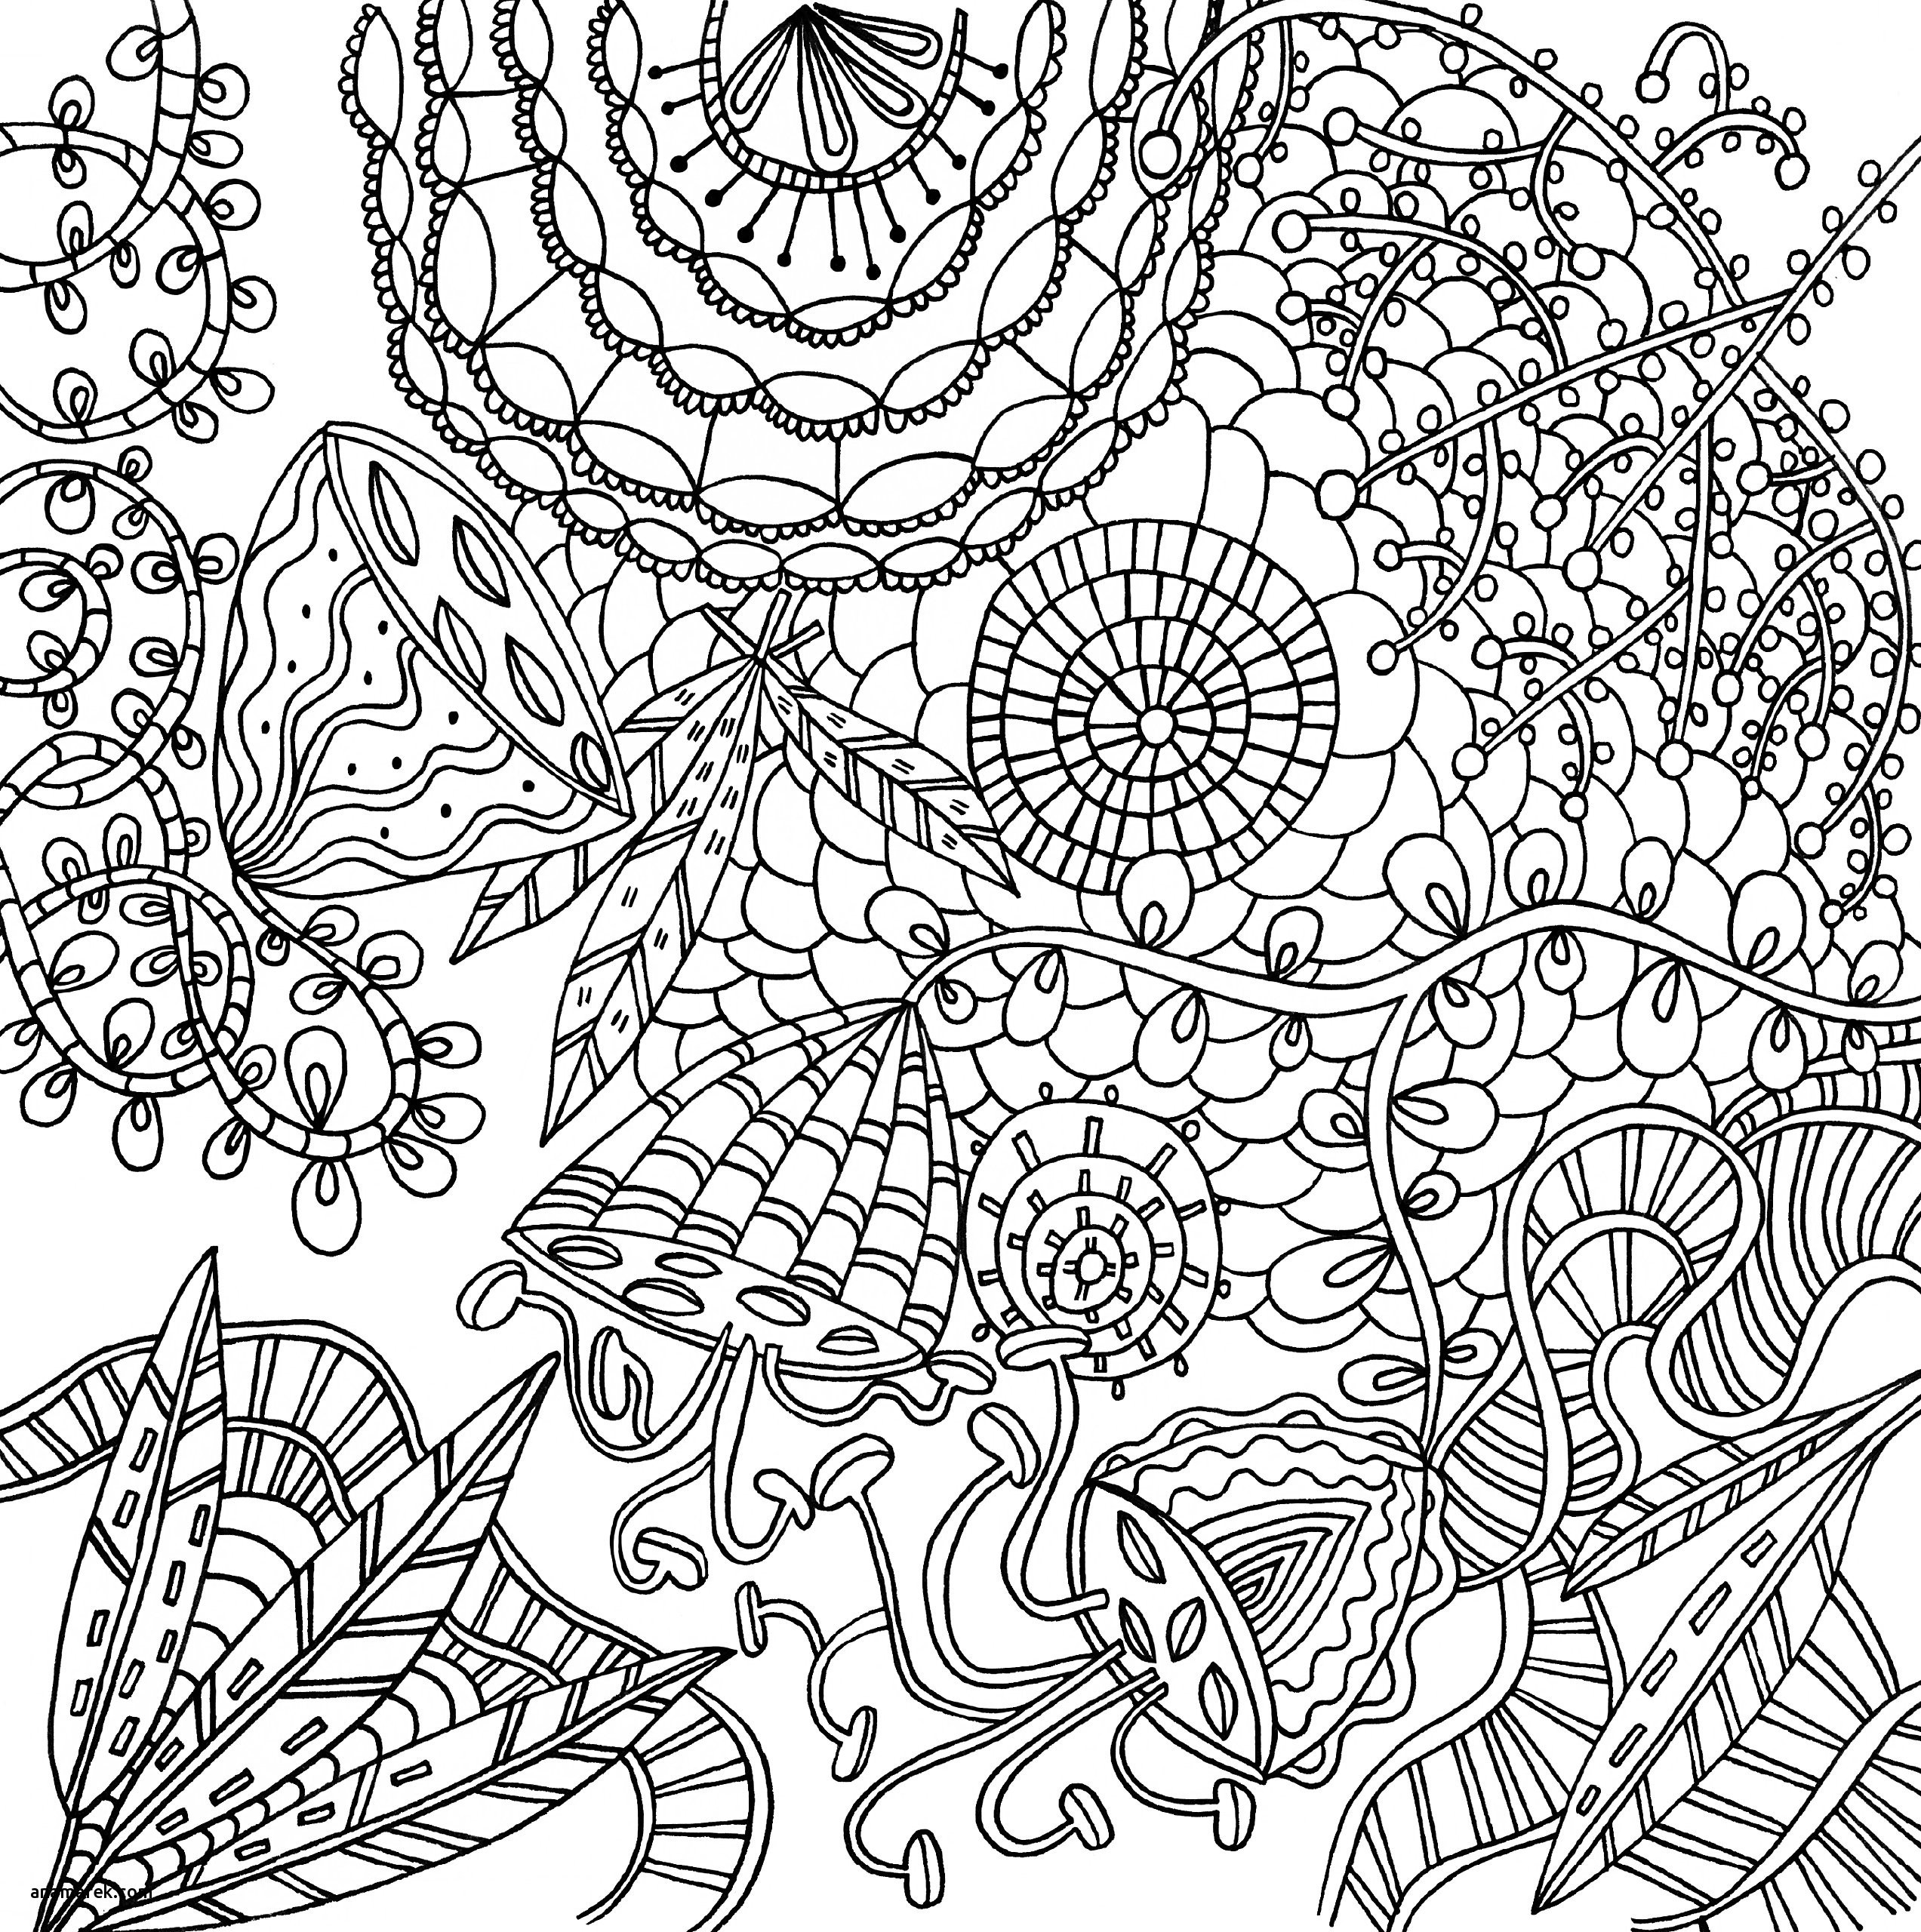 Coloring Book Amazon
 Amazon Adult Coloring Books coloring page